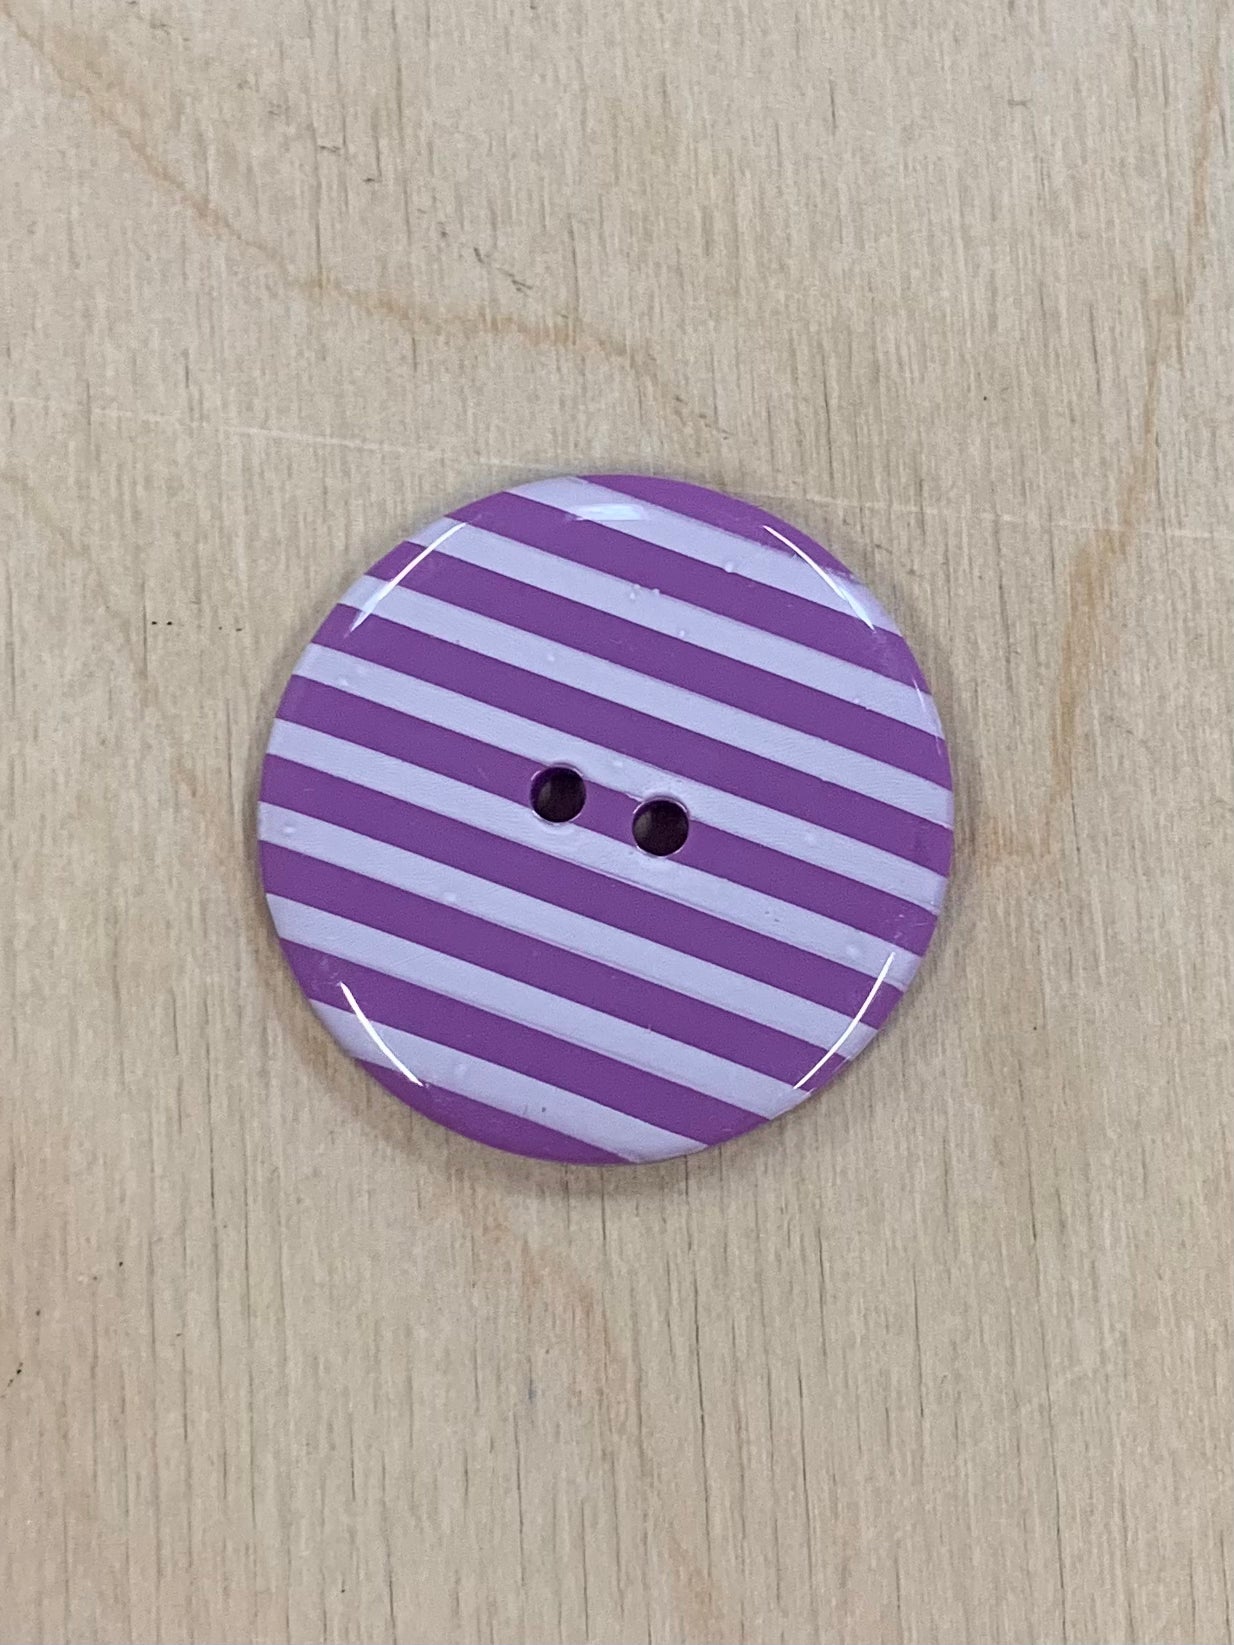 35mm Striped Plastic Buttons